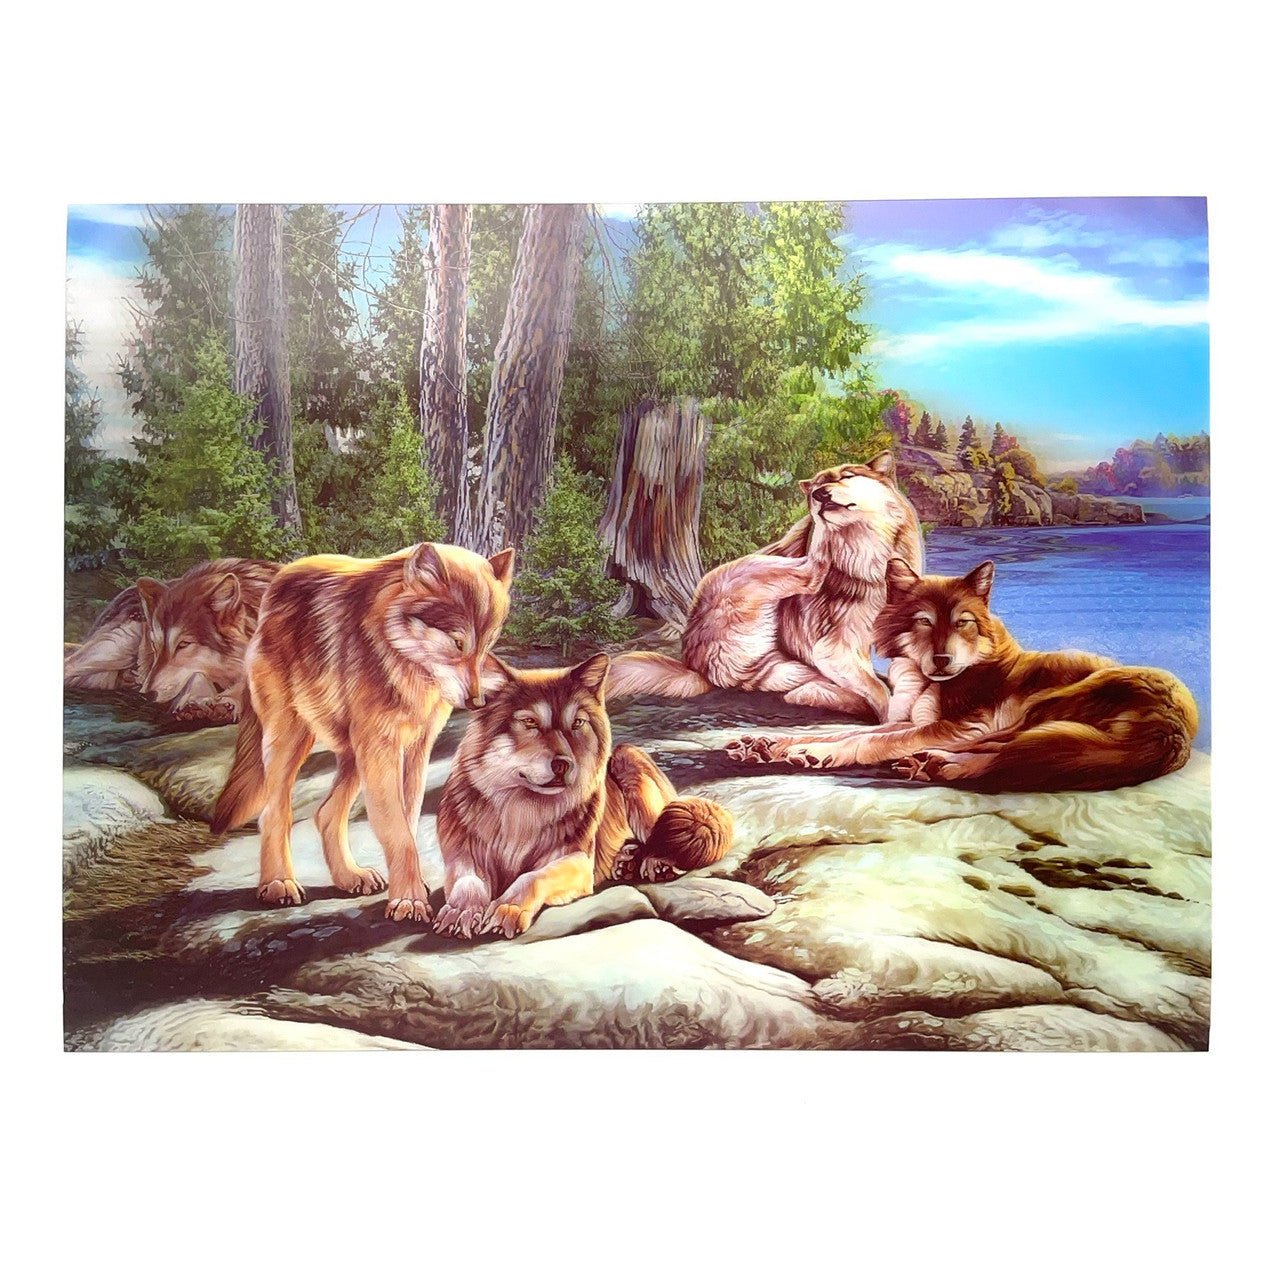 Five wolves bask on some rocks by a creek surrounded by trees and foliage.